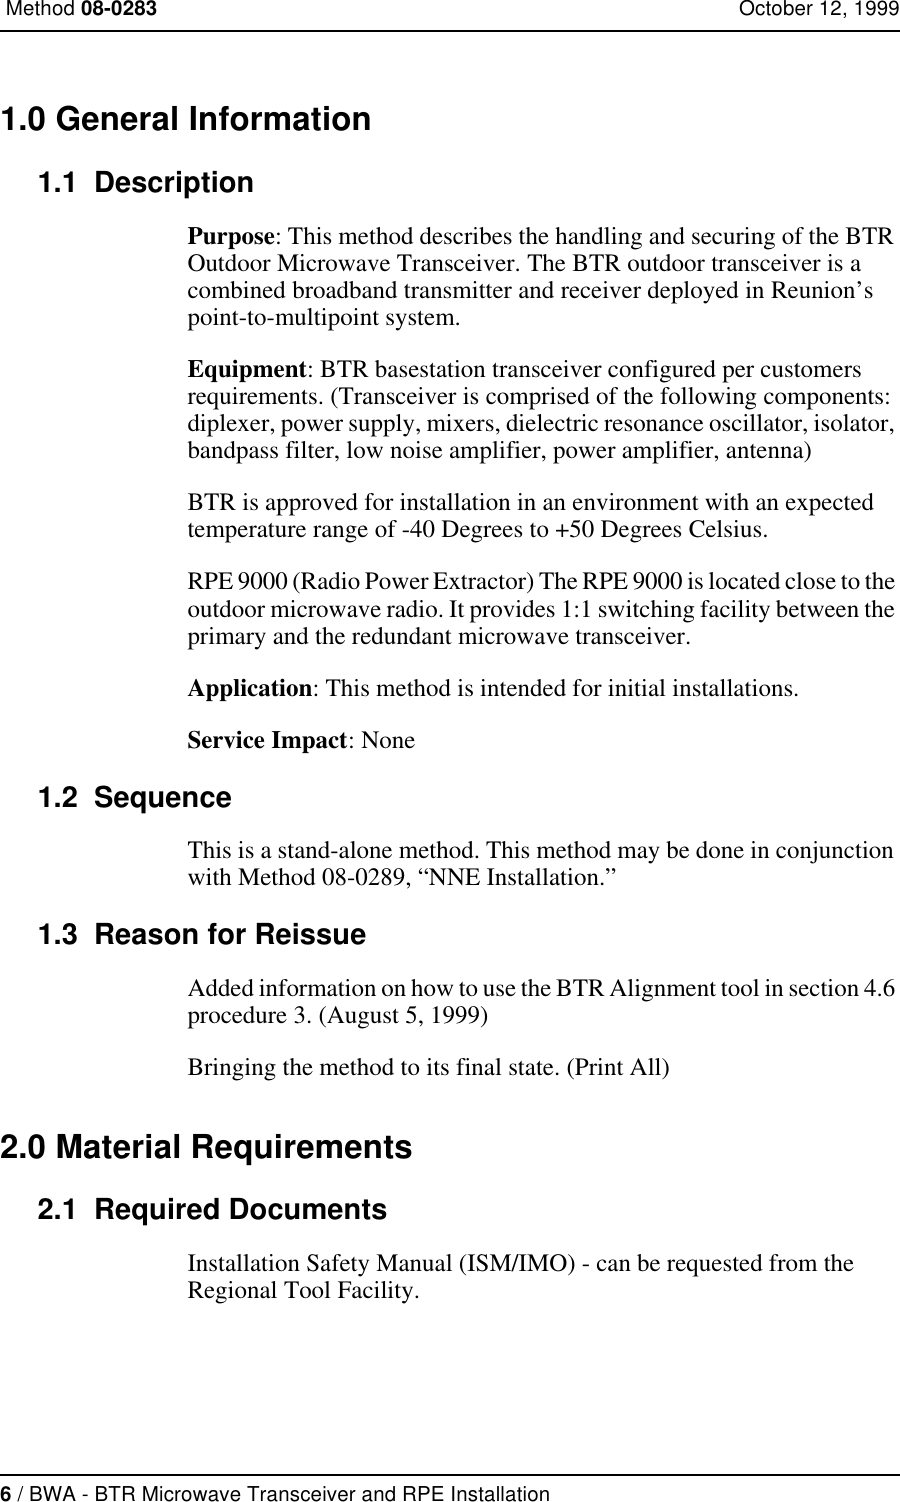 6 / BWA - BTR Microwave Transceiver and RPE Installation Method 08-0283 October 12, 19991.0 General Information1.1  DescriptionPurpose: This method describes the handling and securing of the BTR Outdoor Microwave Transceiver. The BTR outdoor transceiver is a combined broadband transmitter and receiver deployed in Reunion’s point-to-multipoint system.Equipment: BTR basestation transceiver configured per customers requirements. (Transceiver is comprised of the following components: diplexer, power supply, mixers, dielectric resonance oscillator, isolator, bandpass filter, low noise amplifier, power amplifier, antenna)BTR is approved for installation in an environment with an expected temperature range of -40 Degrees to +50 Degrees Celsius.RPE 9000 (Radio Power Extractor) The RPE 9000 is located close to the outdoor microwave radio. It provides 1:1 switching facility between the primary and the redundant microwave transceiver. Application: This method is intended for initial installations.Service Impact: None1.2  SequenceThis is a stand-alone method. This method may be done in conjunction with Method 08-0289, “NNE Installation.”1.3  Reason for ReissueAdded information on how to use the BTR Alignment tool in section 4.6 procedure 3. (August 5, 1999)Bringing the method to its final state. (Print All)2.0 Material Requirements2.1  Required DocumentsInstallation Safety Manual (ISM/IMO) - can be requested from the Regional Tool Facility.